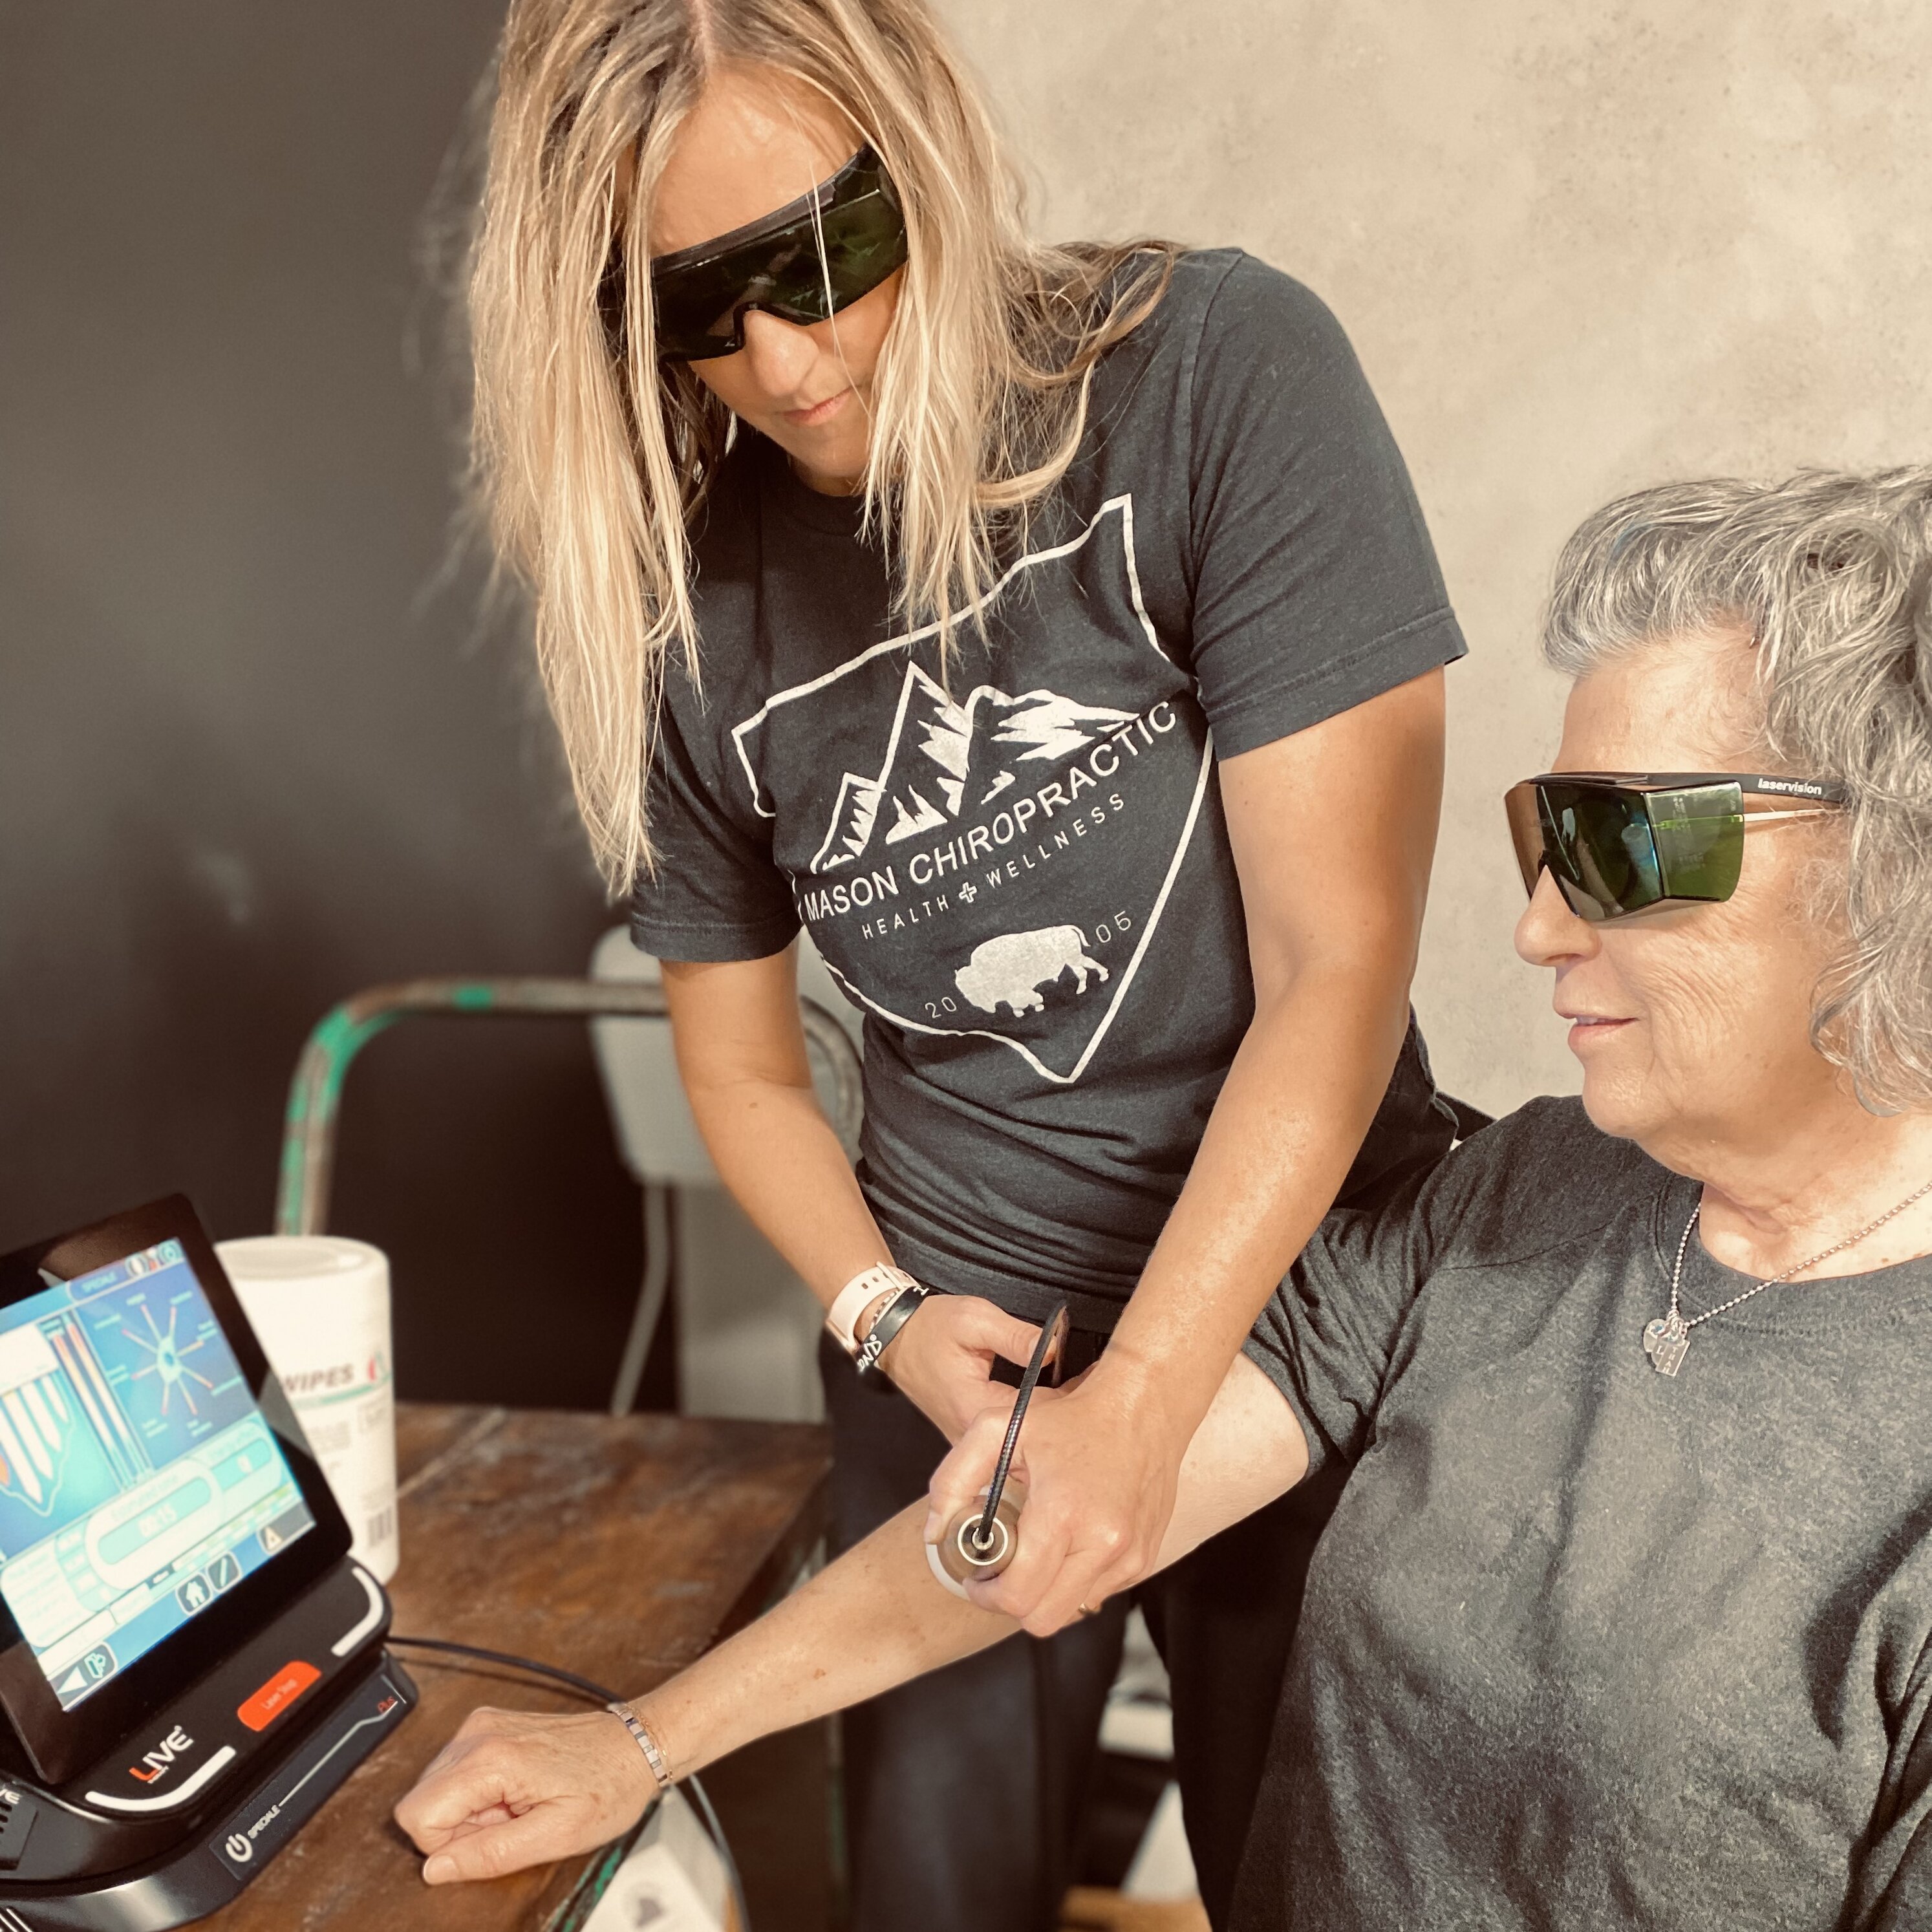 franklin tennessee woman receives k-laser